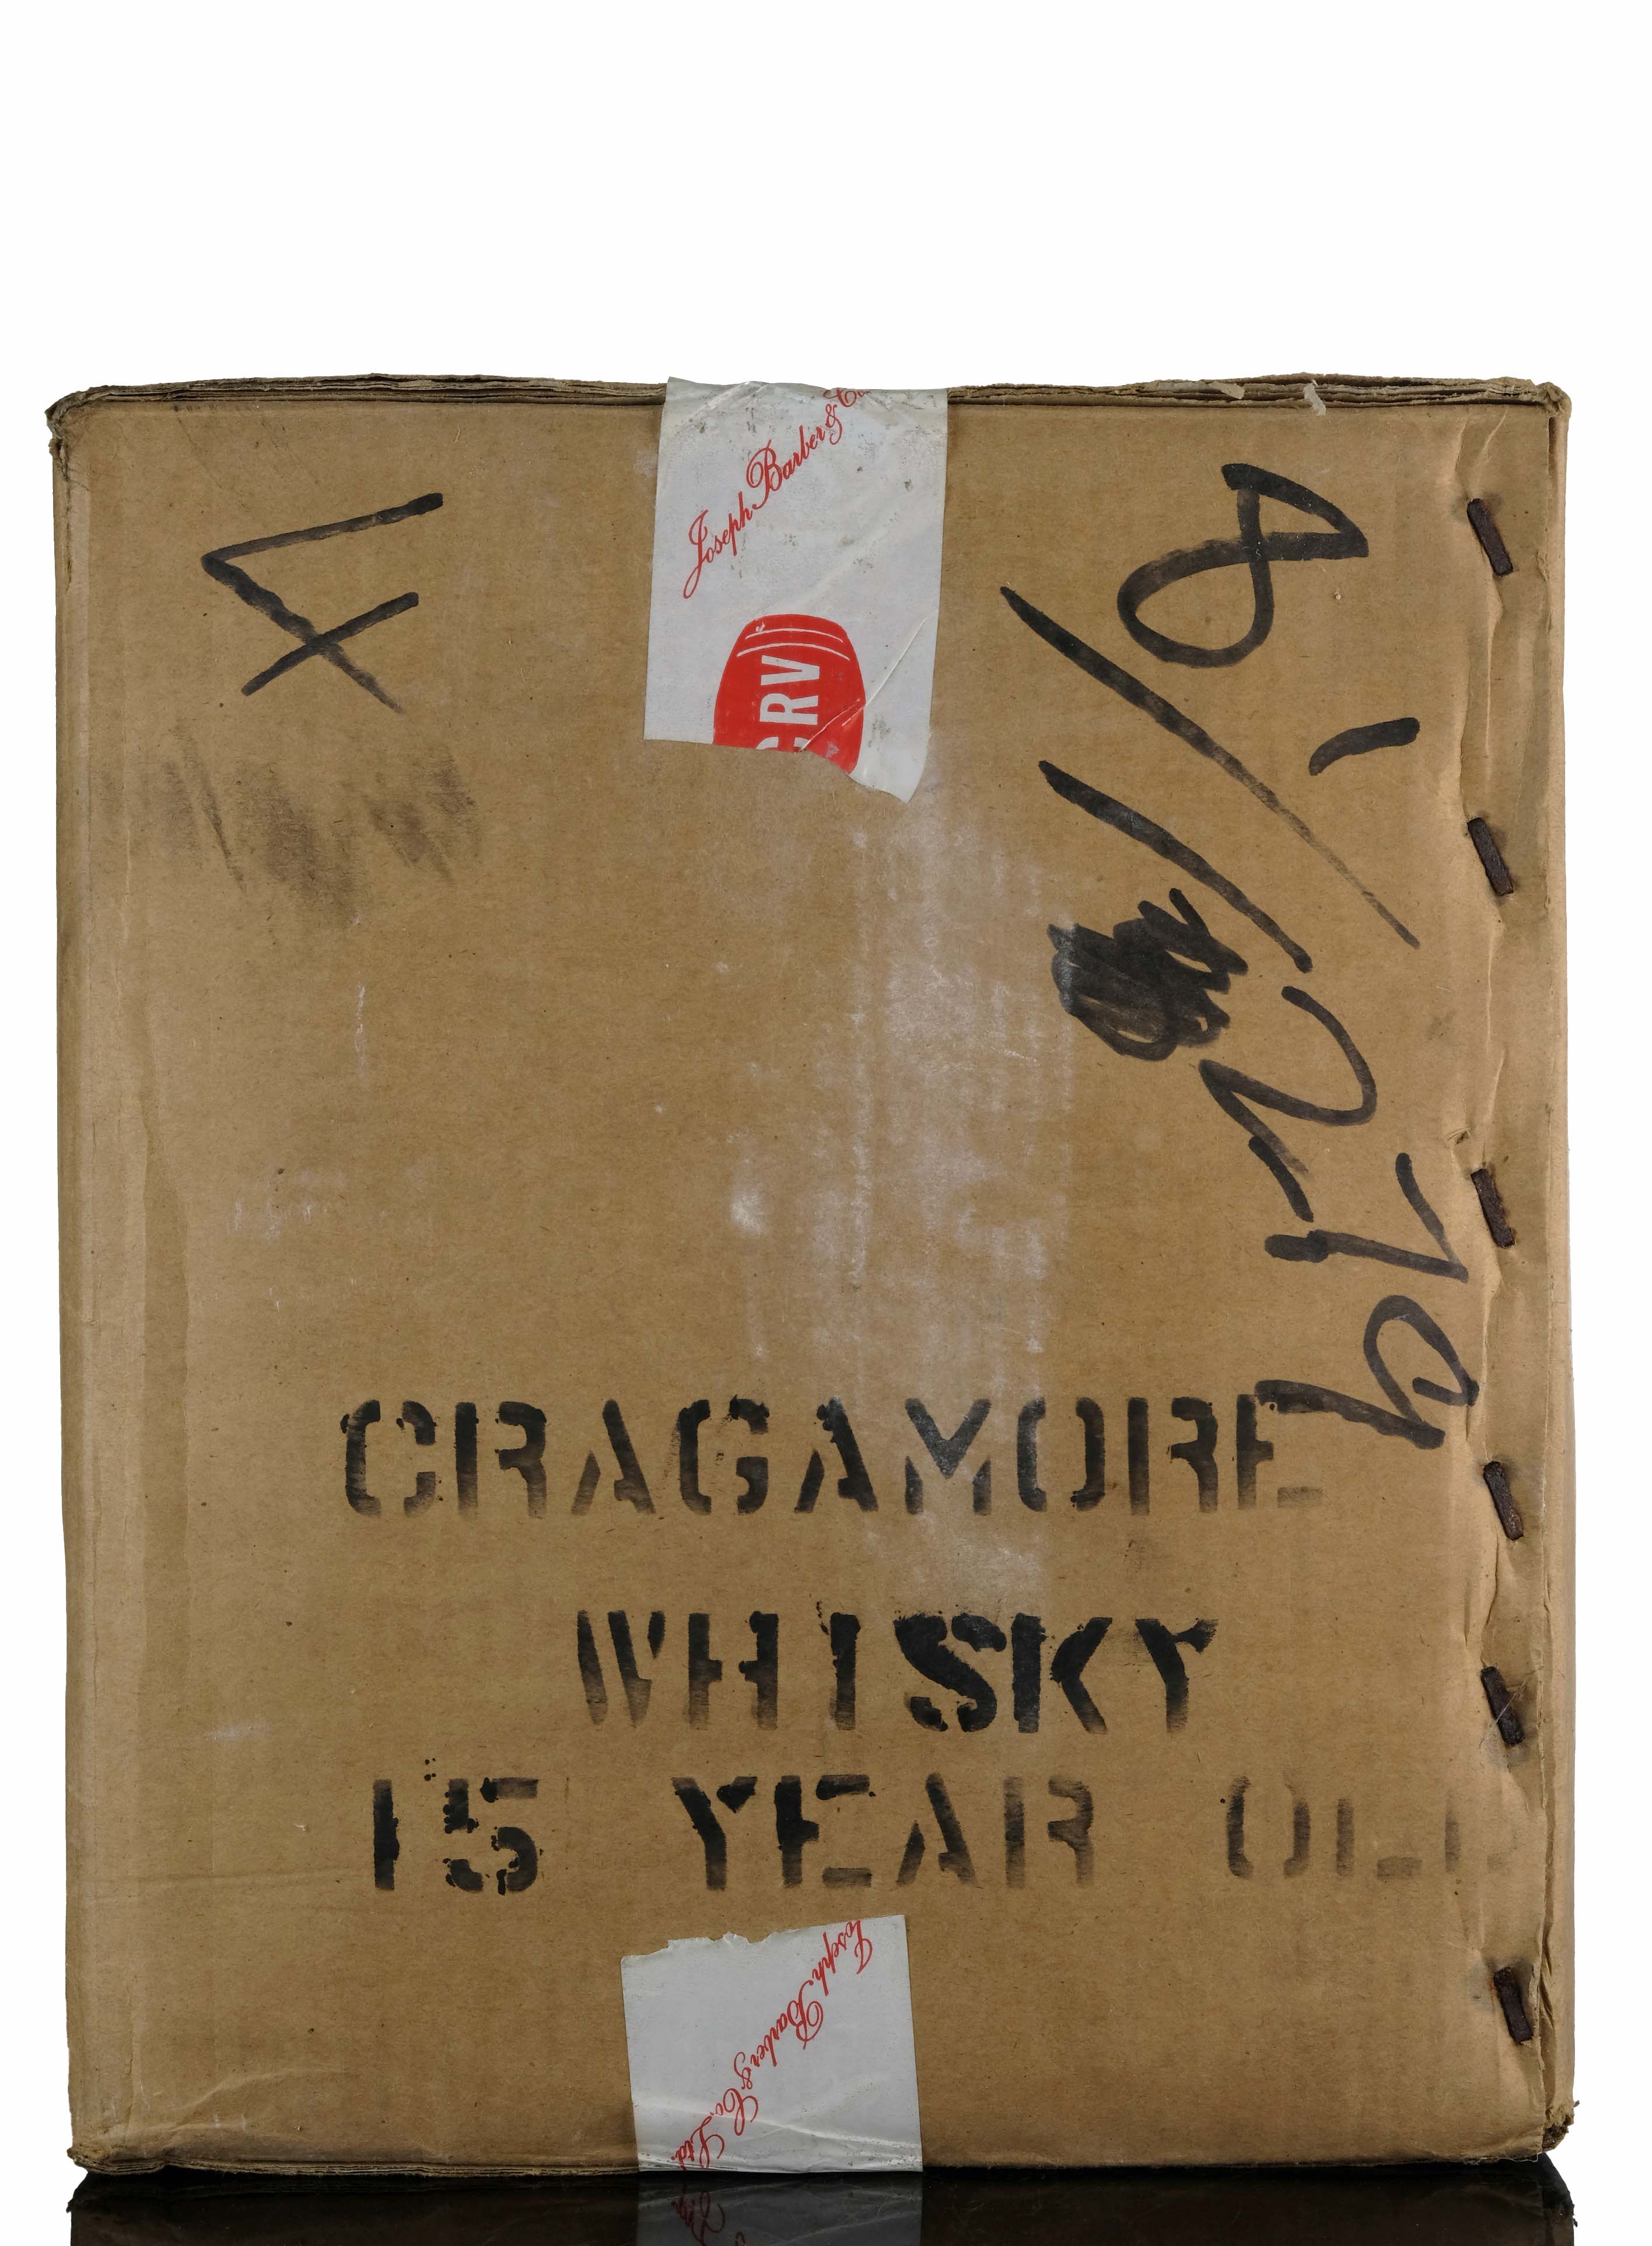 2 x Cragganmore (Cragamore) 1966-1981 - 15 Year Old - Private Bottling 